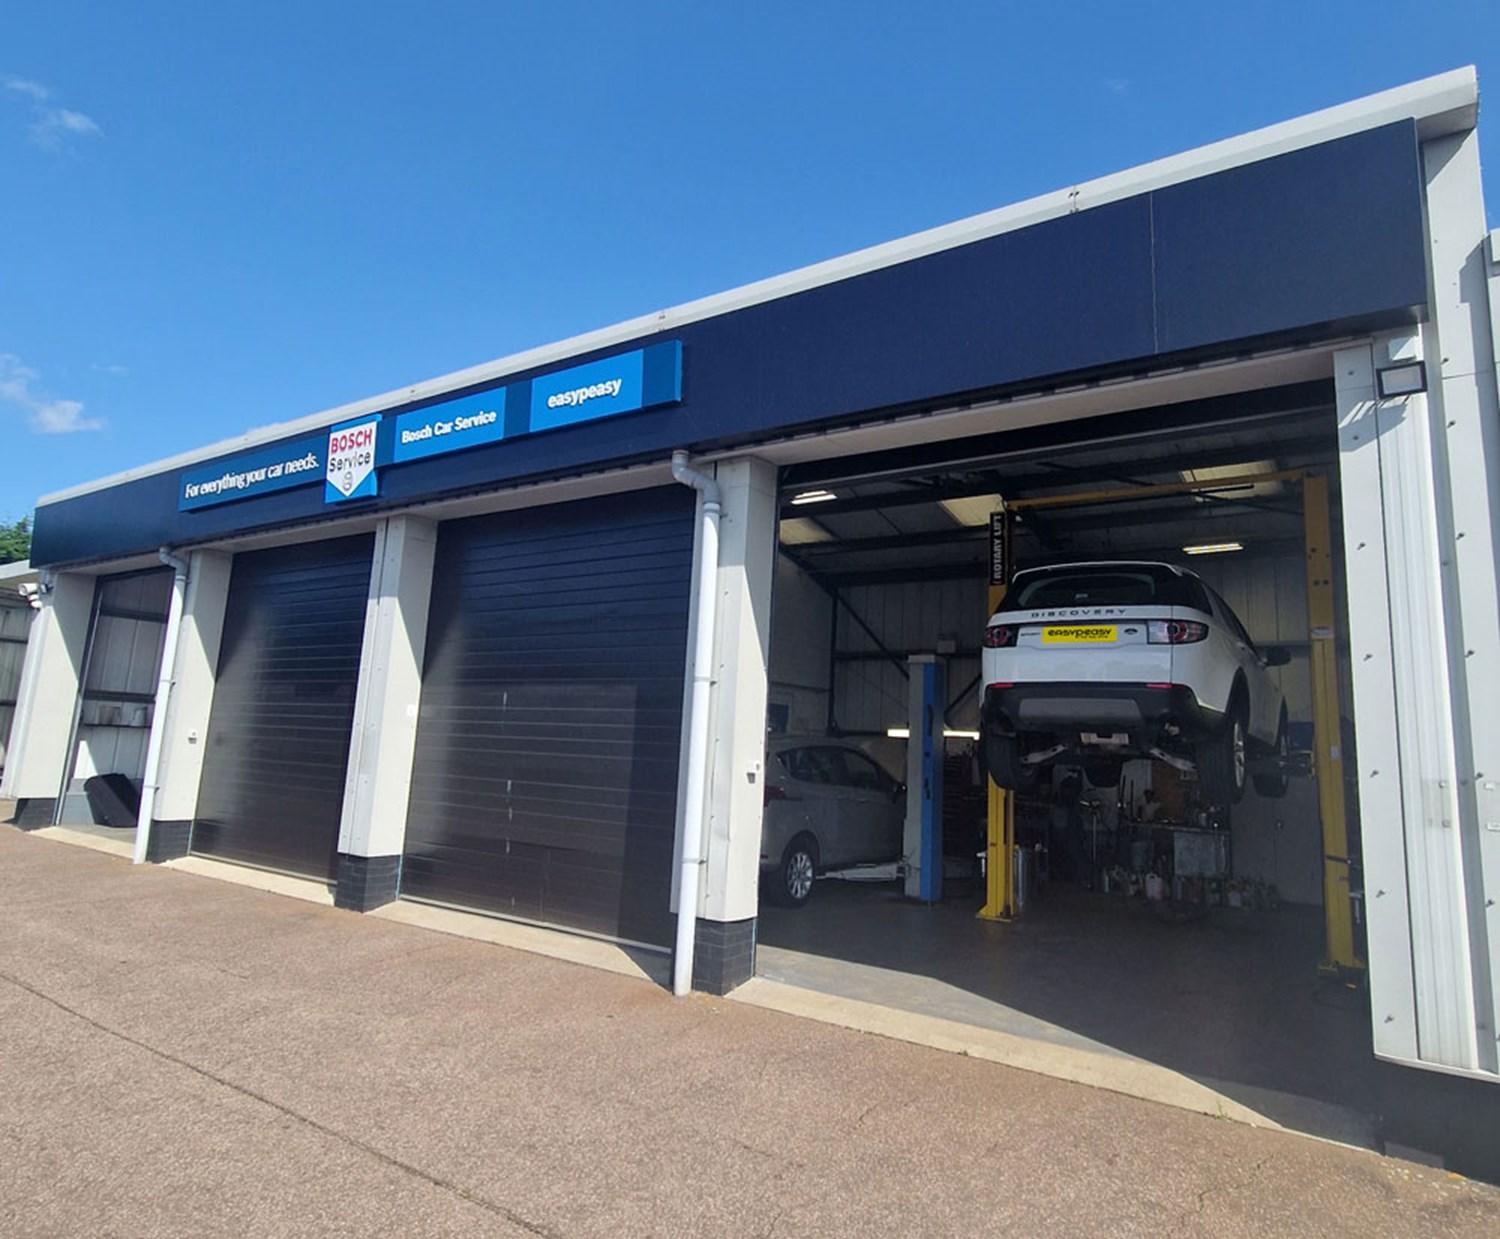 Exterior view of our state-of-the-art car mot centre located at easypeasy Bosch Norwich. Expert technicians and modern facilities ensure top-quality automotive care for your vehicle.